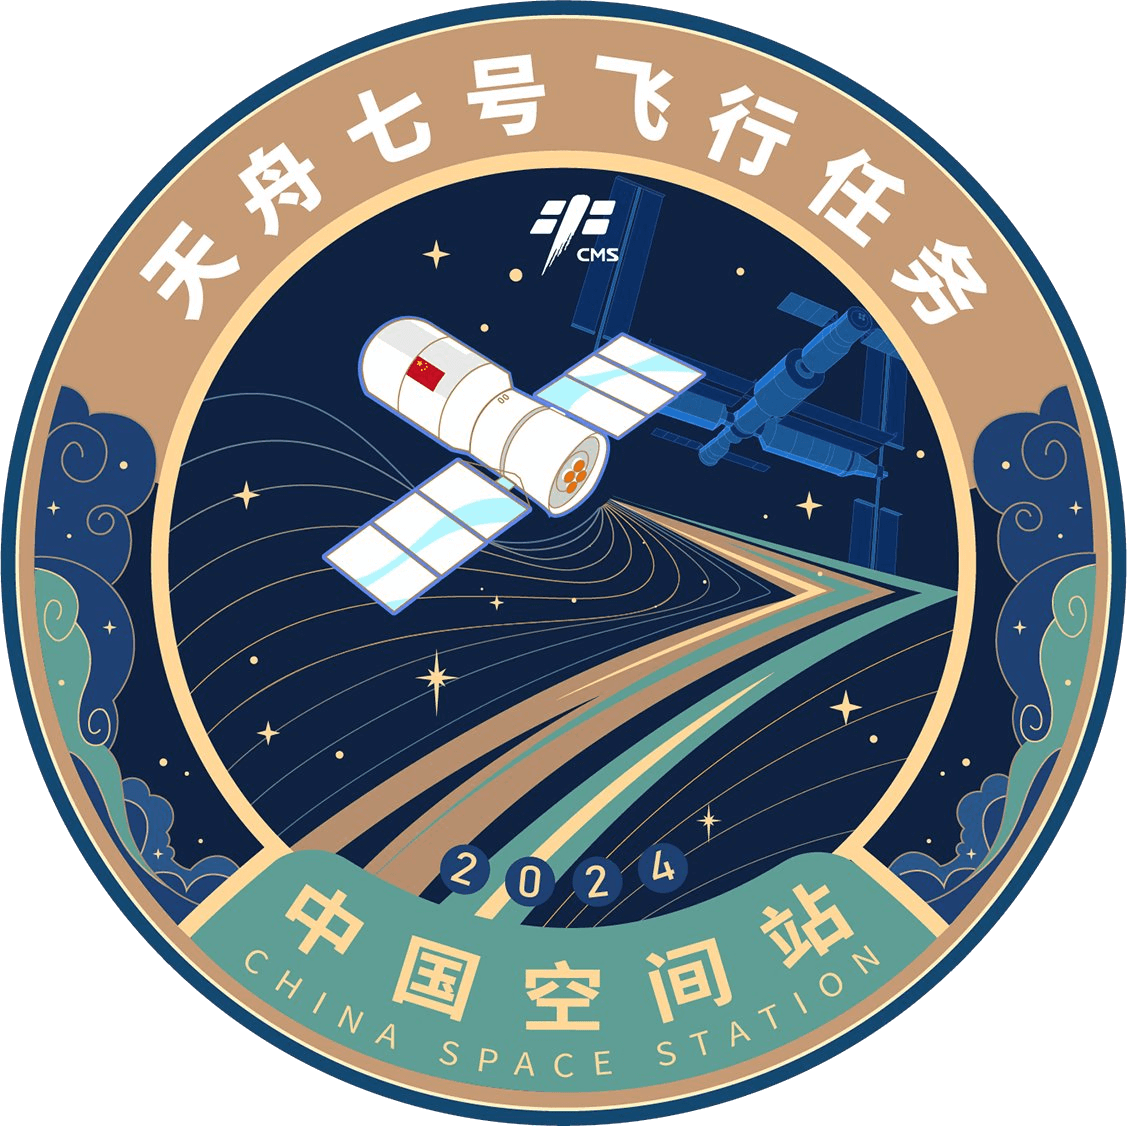 The mission patch of the Tianzhou 7 resupply mission. ©China Manned Space Agency